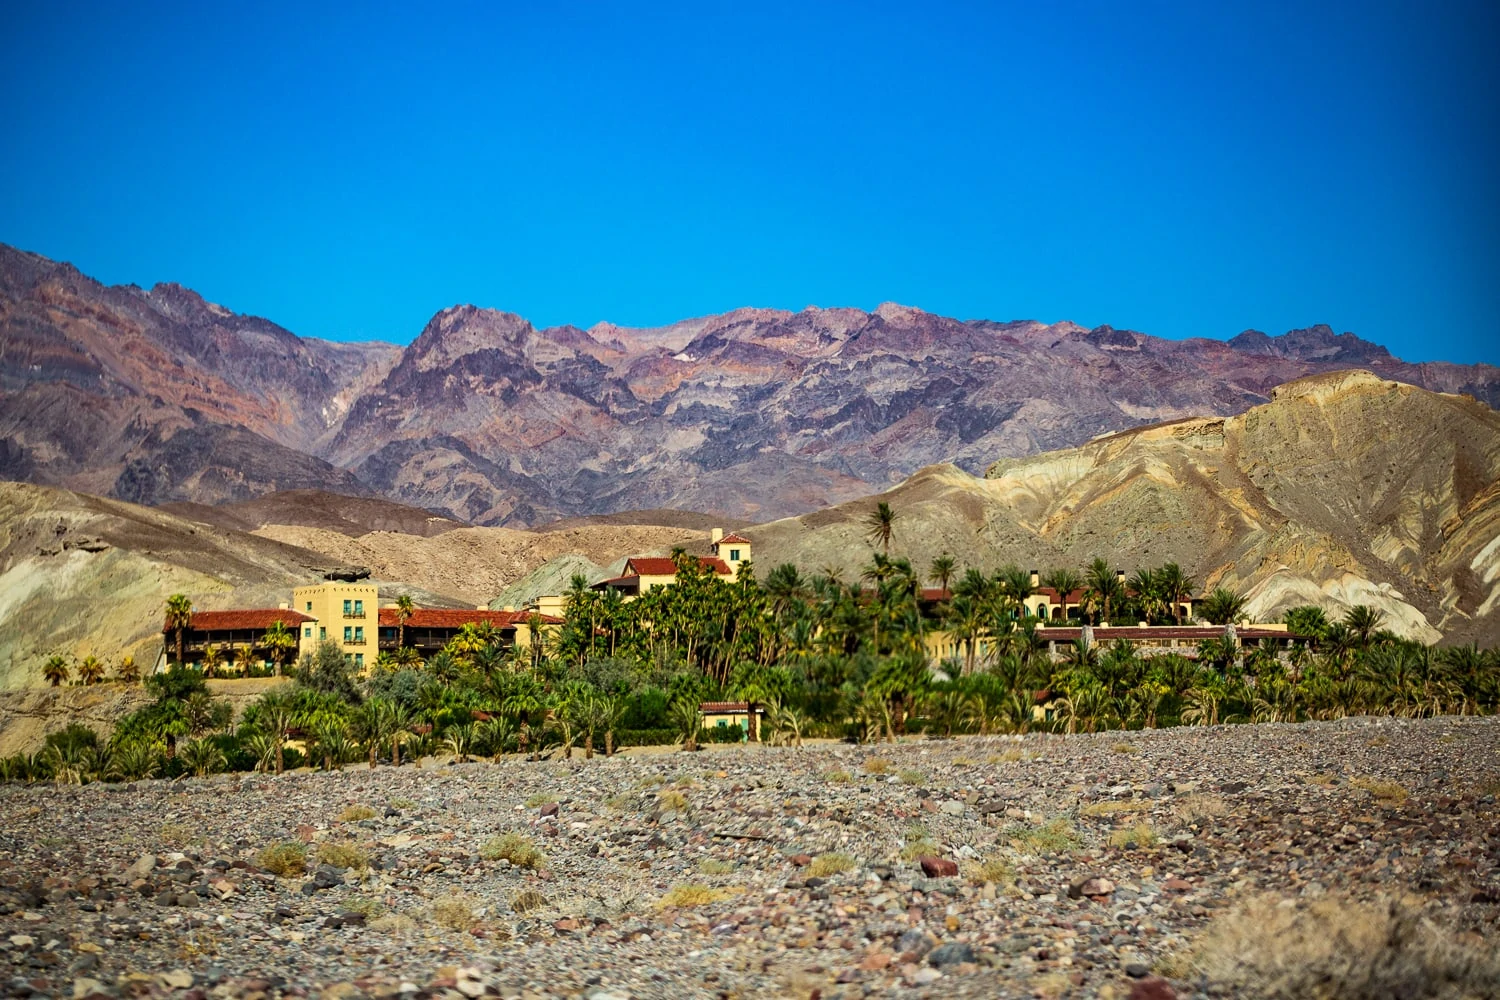 A red roofed hotel surrounded by palm trees in Death Valley National Park. A